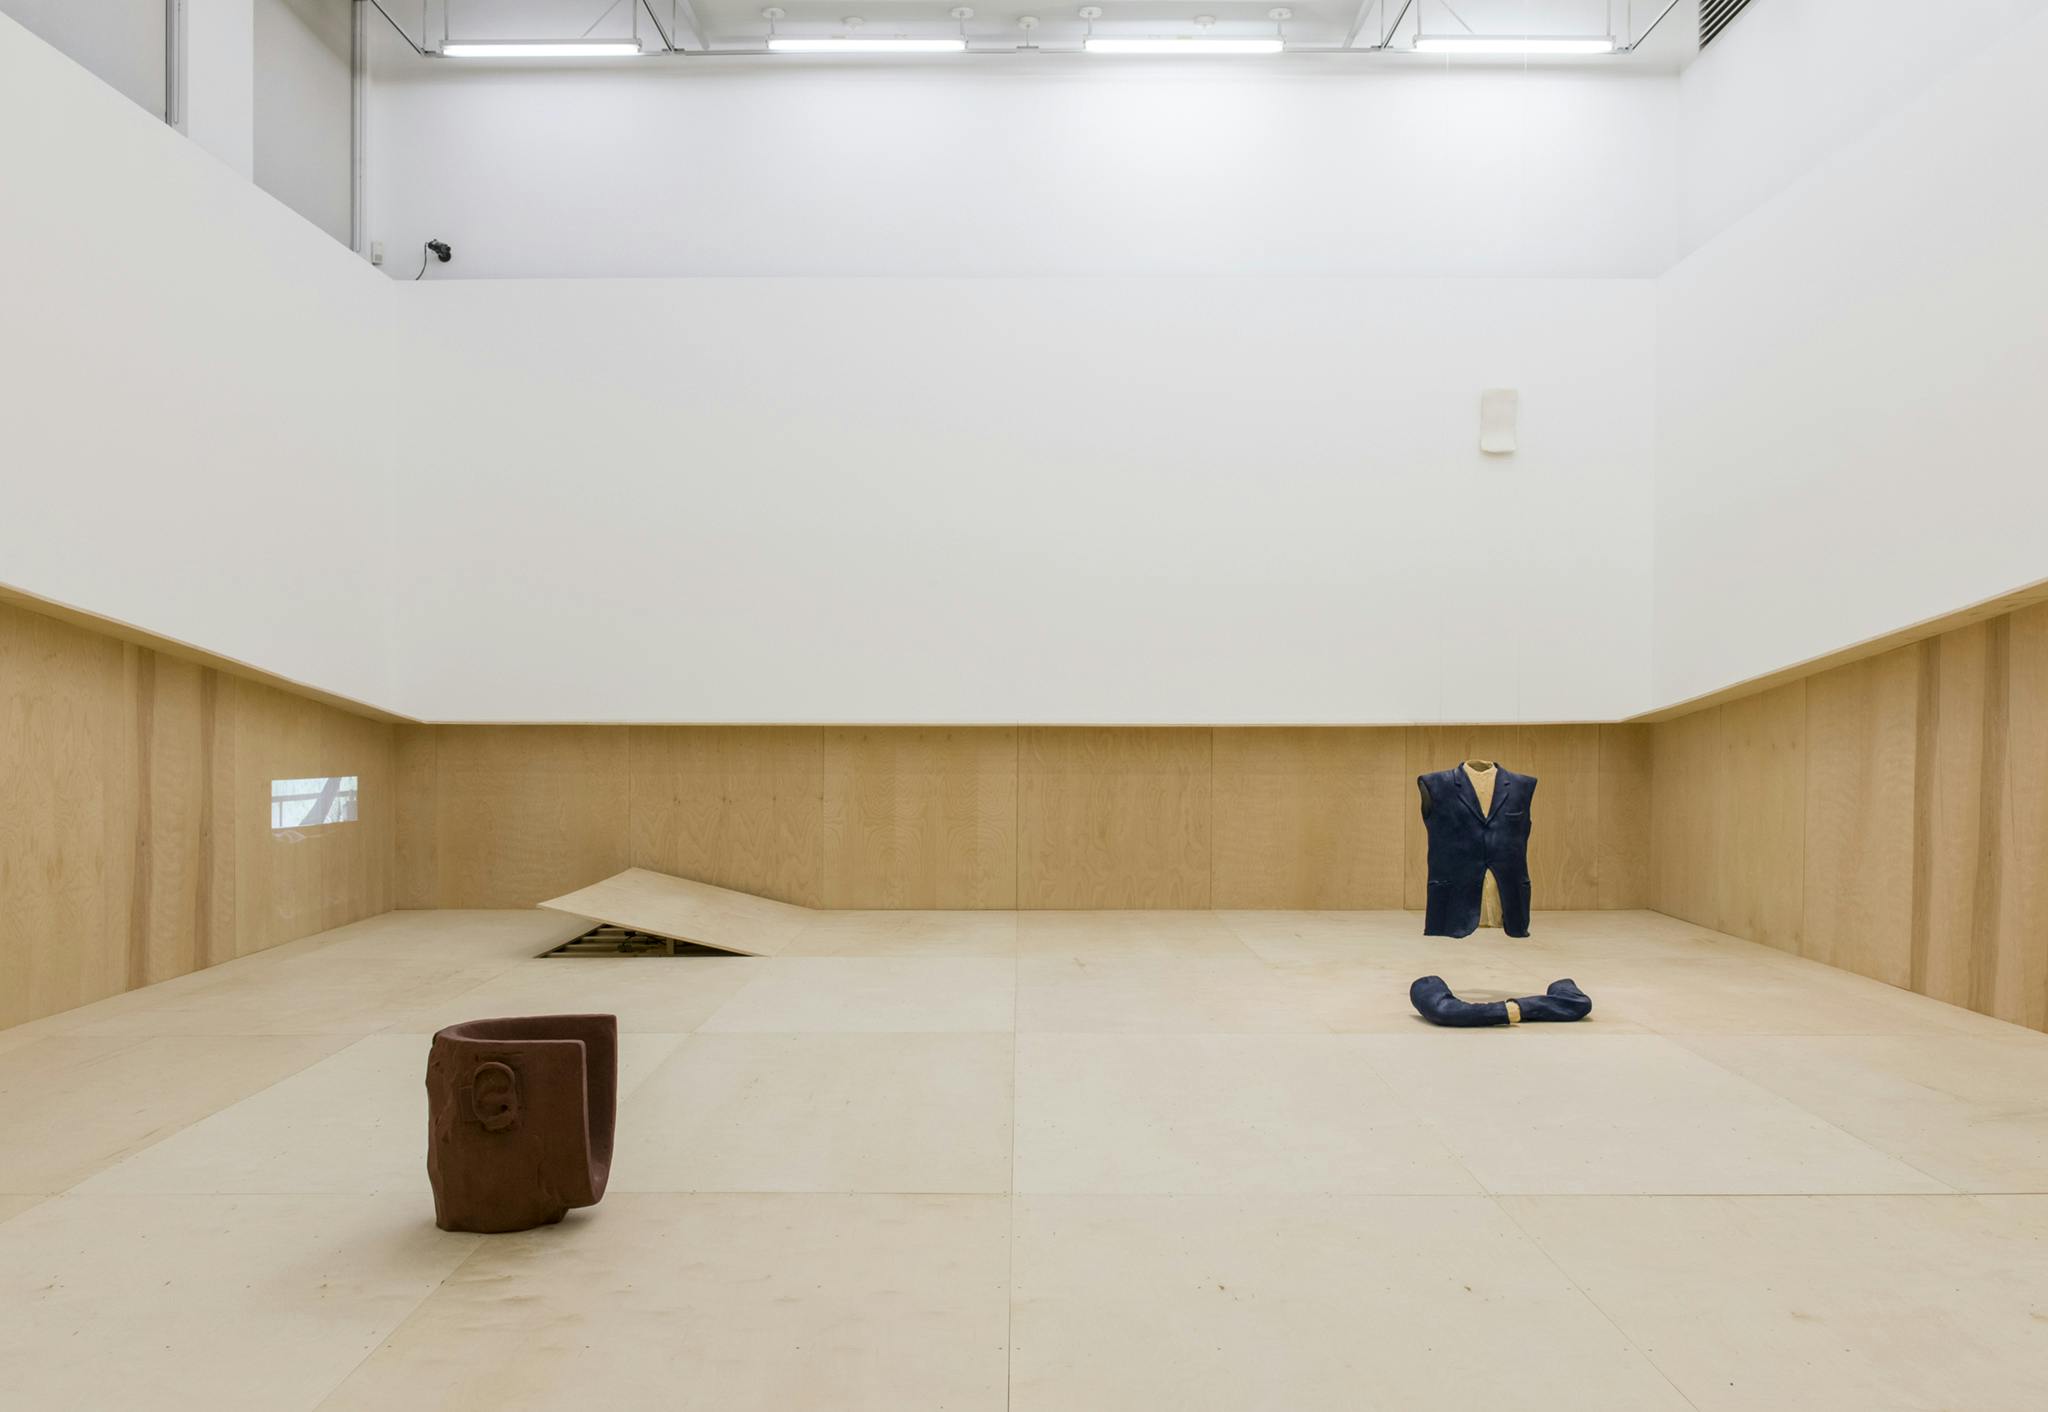 Large plywood sheets panel the floor and half the walls of a gallery. A sculpture of a torso in a blue jacket is installed on the right, a projection and a brown, chair-like sculpture on the left. 